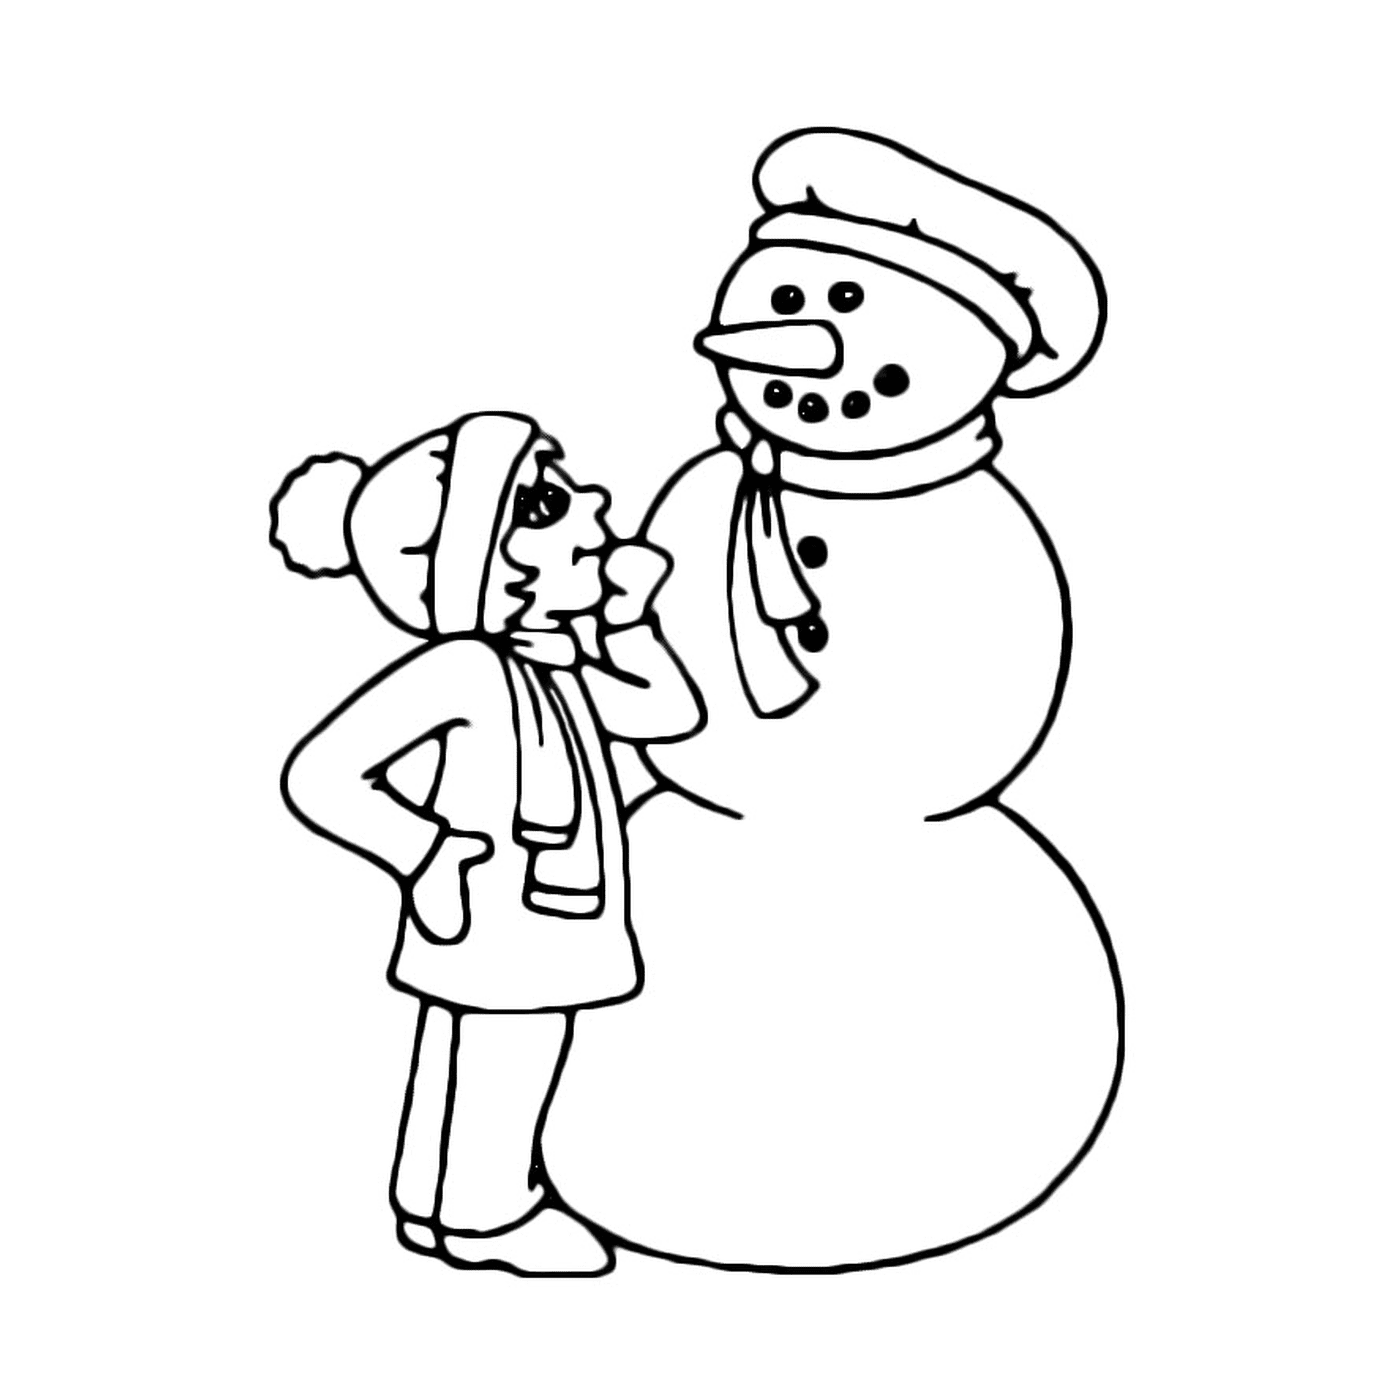  A woman standing next to a snowman wearing a hat 